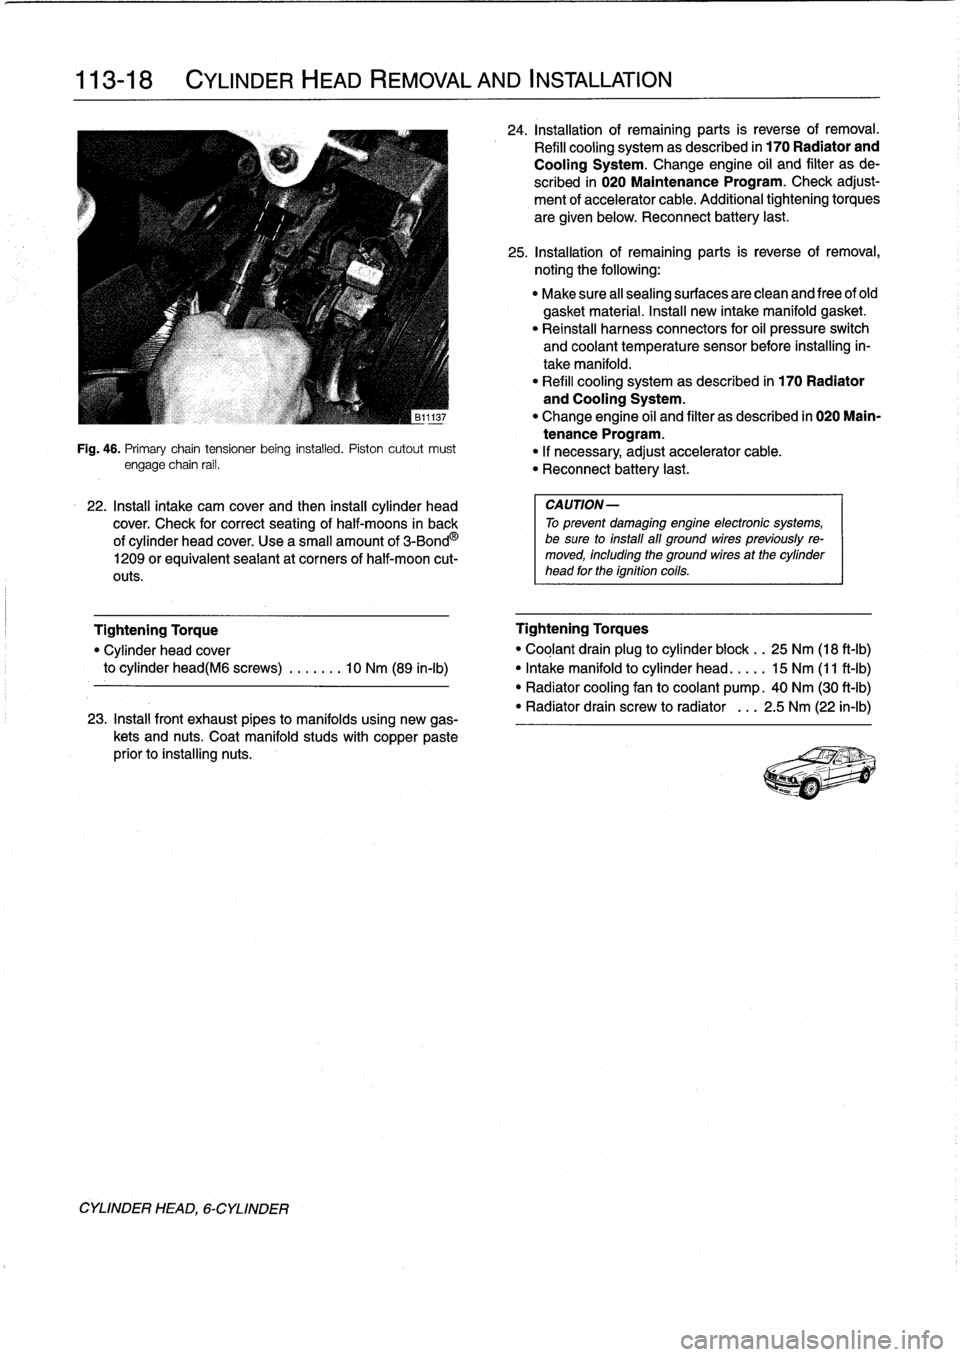 BMW 318i 1997 E36 Service Manual 
113-
1
8

	

CYLINDER
HEAD
REMOVAL
AND
INSTALLATION

CYLINDER
HEAD,
6-CYLINDER

Fig
.
46
.
Primary
chaintensioner
being
installed
.
Piston
cutout
must
engage
chain
rail
.

22
.
Install
intake
cam
cov